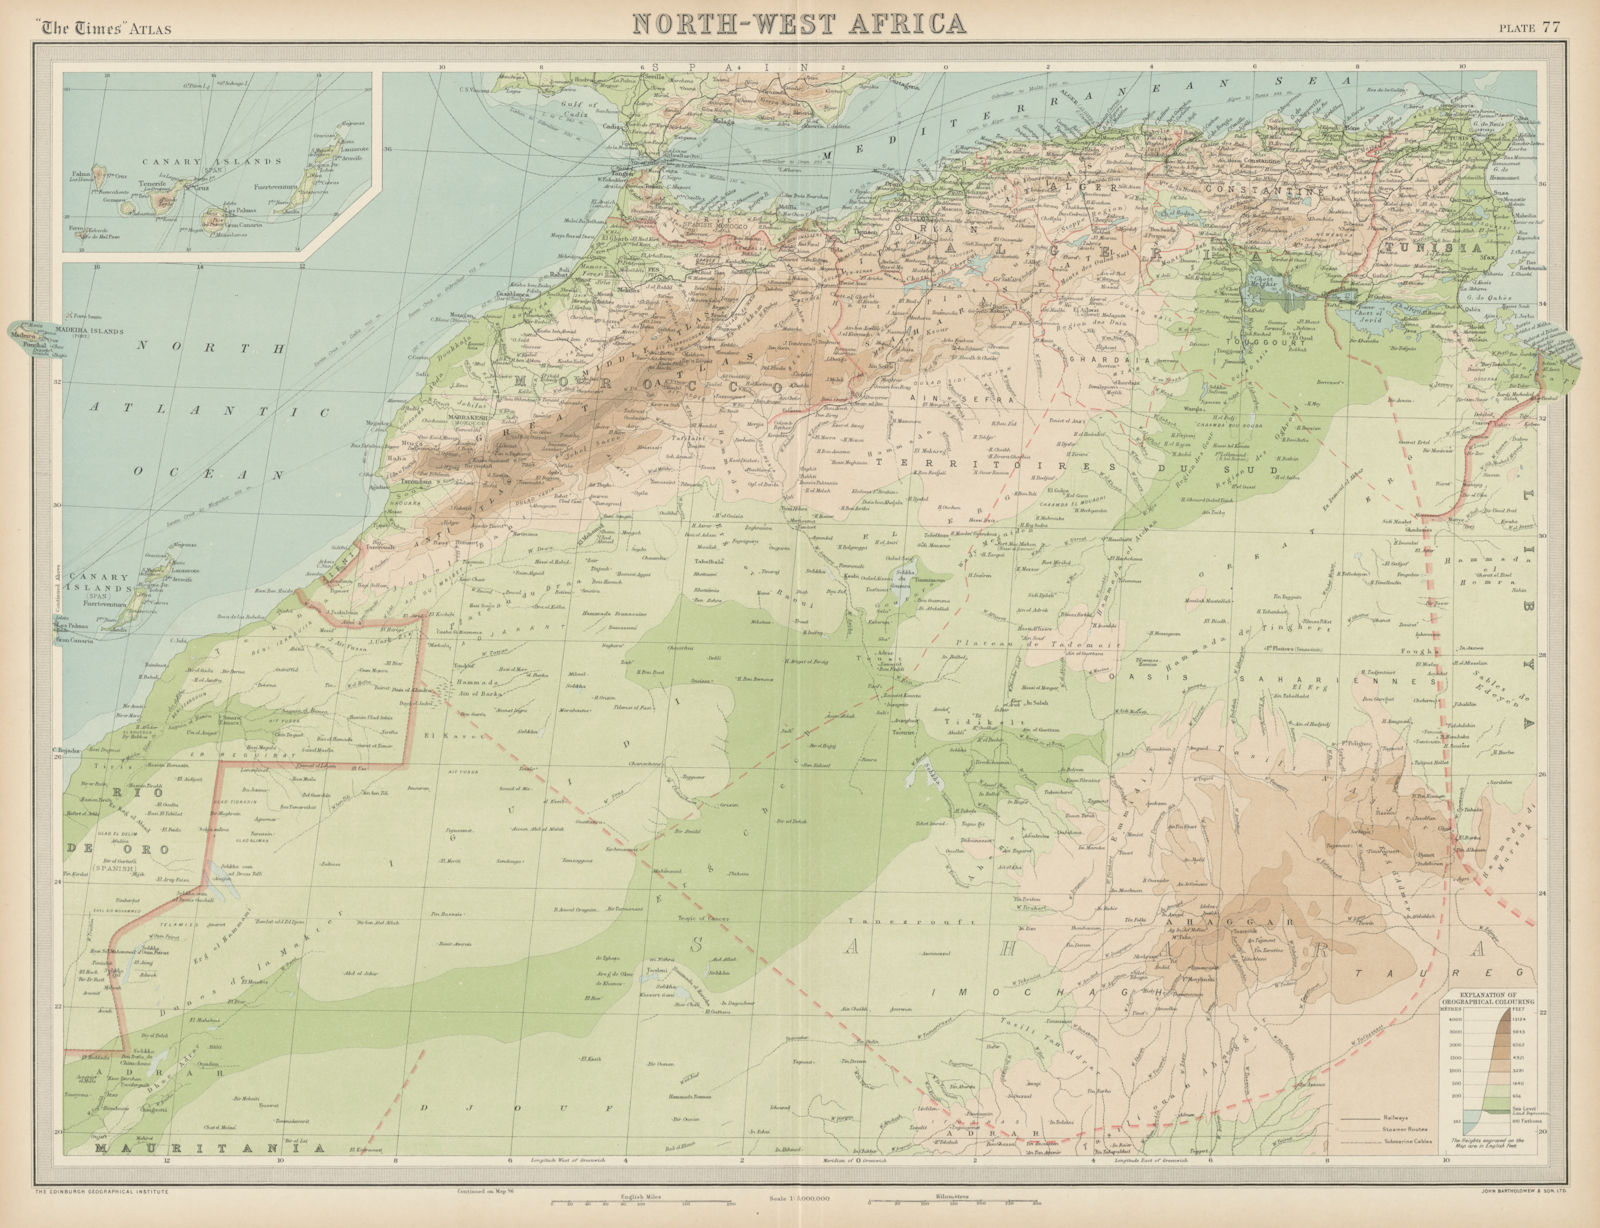 Associate Product North-west Africa. Morocco &c. Sahara desert. Unresolved borders. TIMES 1922 map